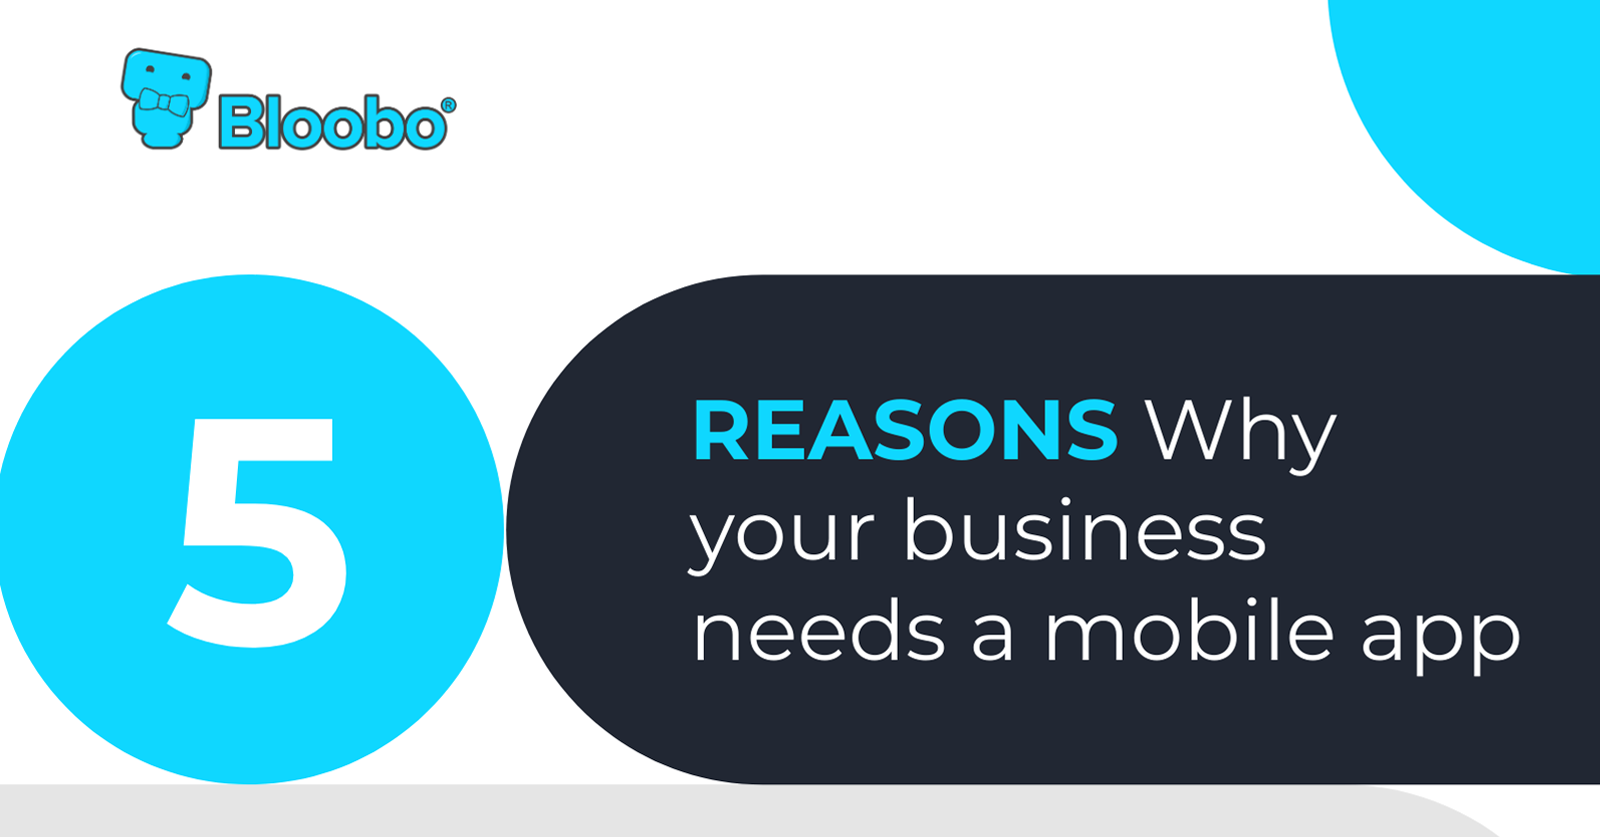 5 Reasons for Mobile App for Business